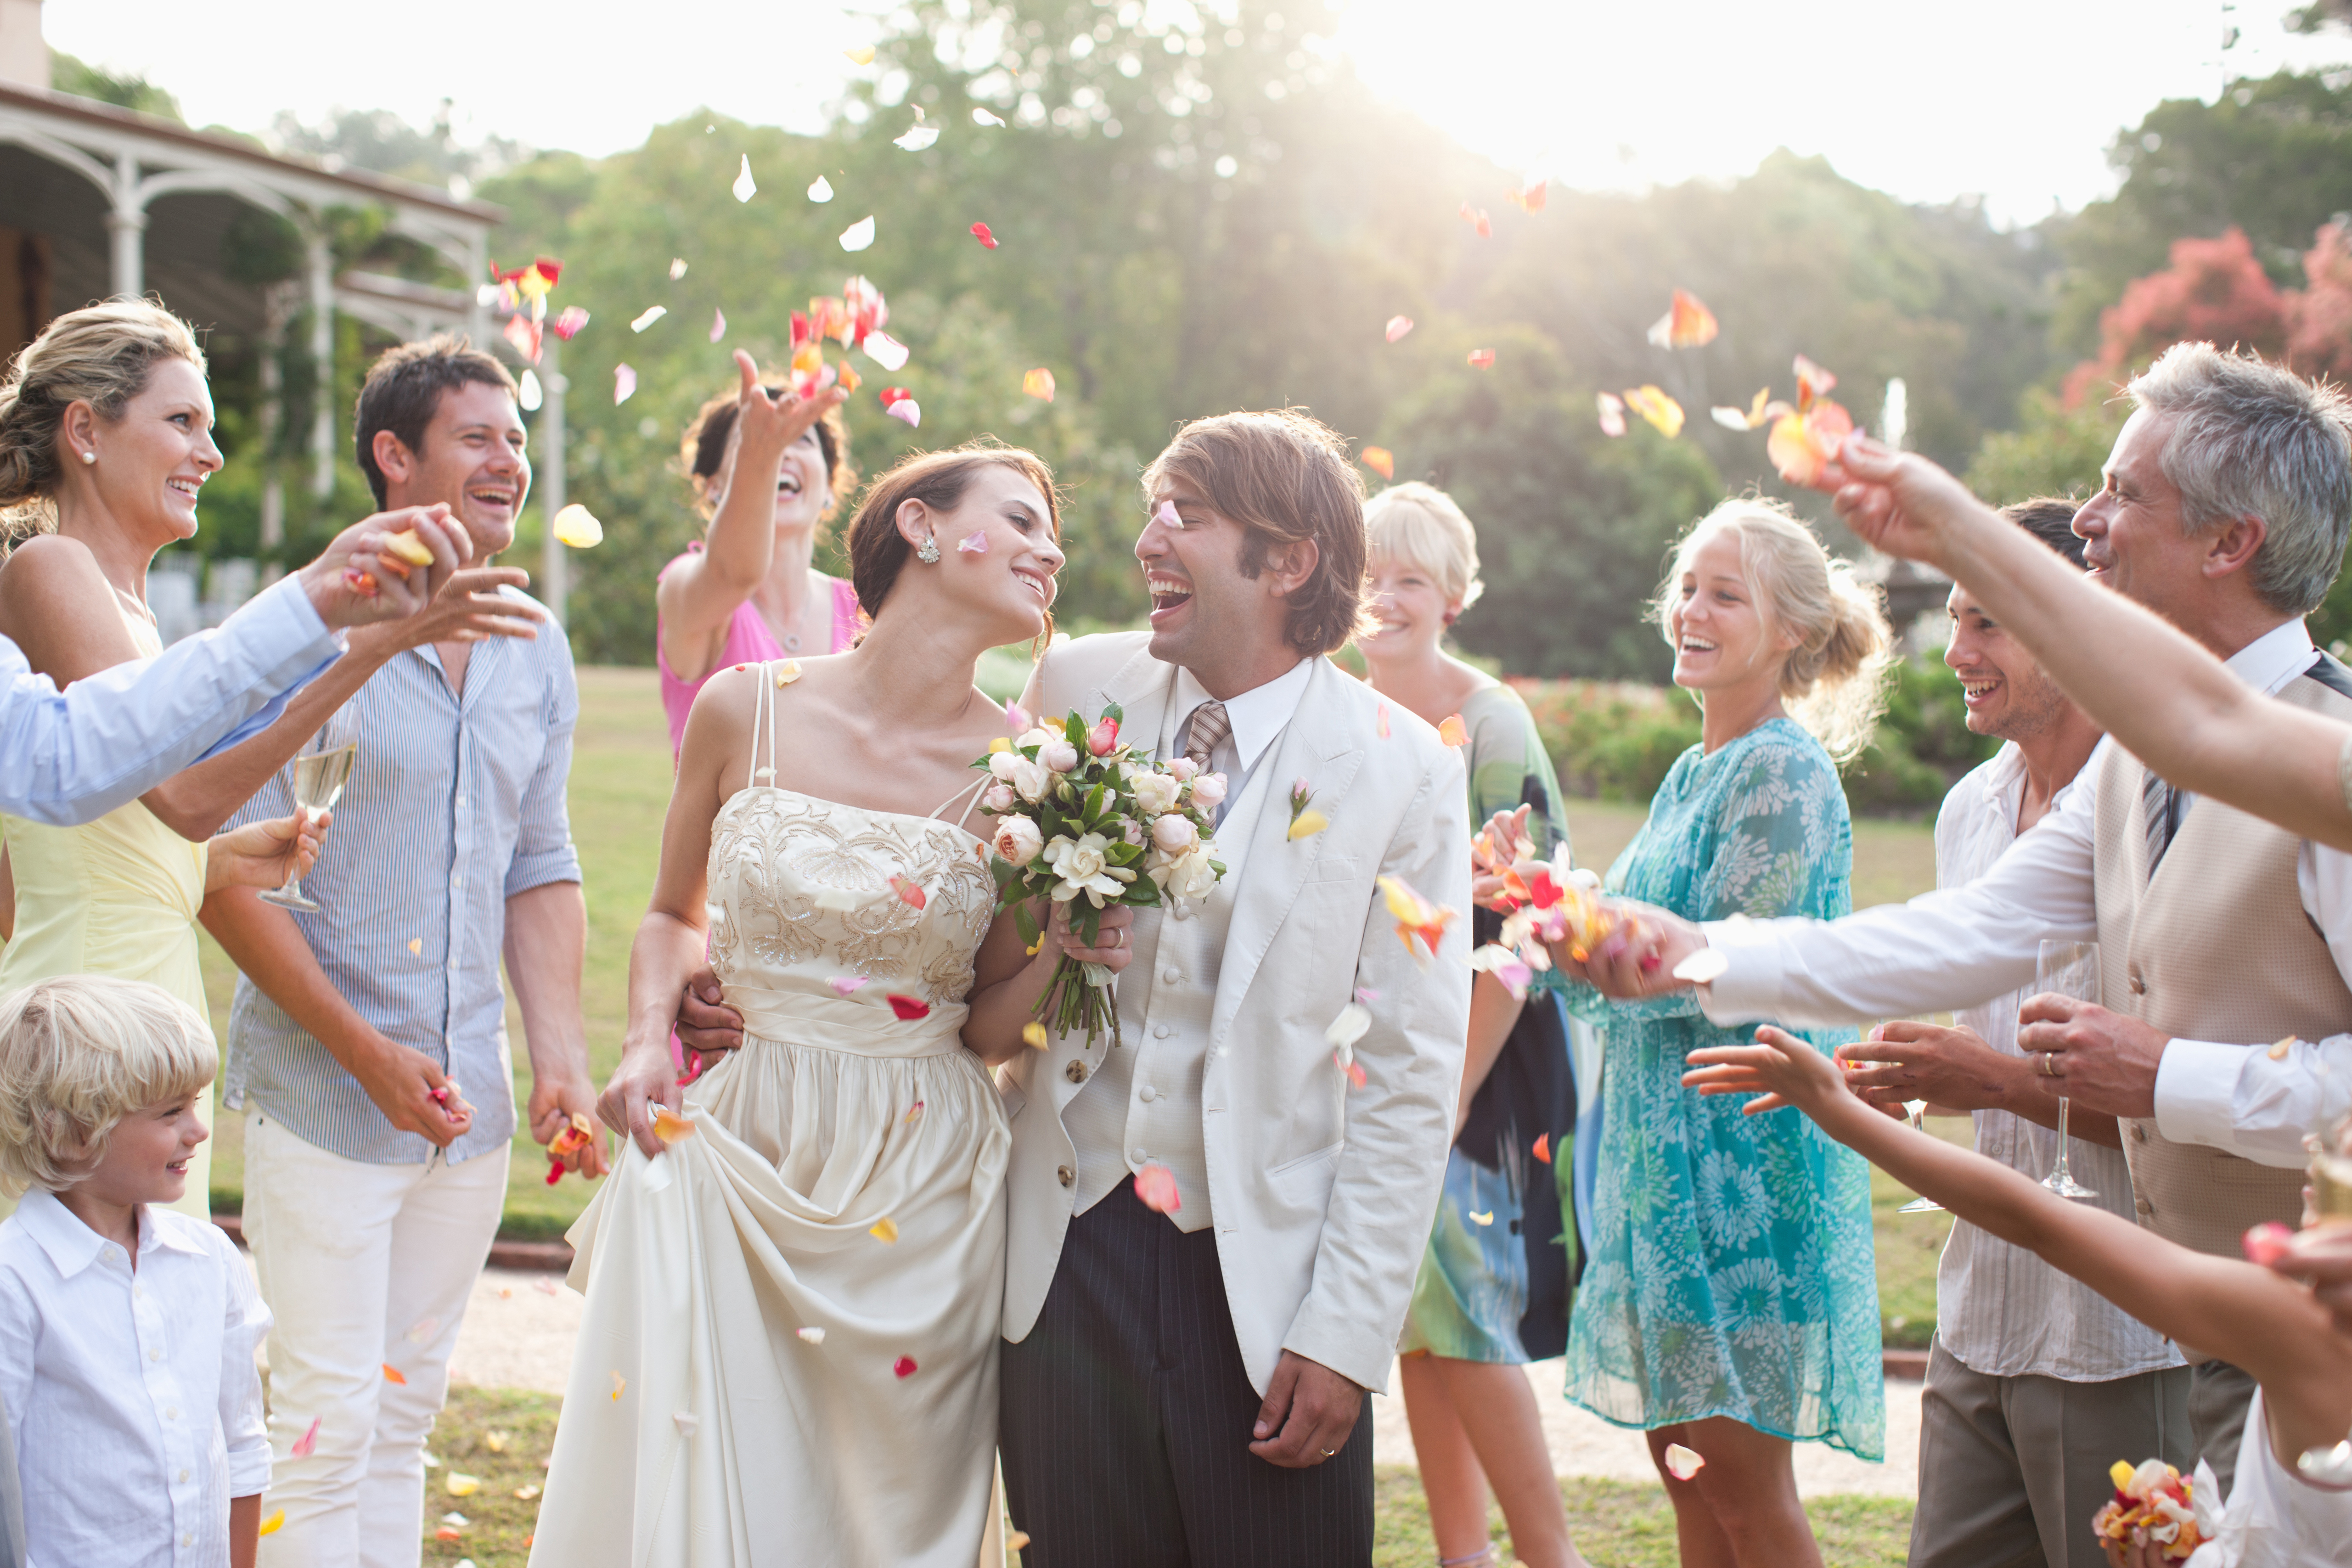 Guests throwing rose petals on bride and groom | Source: Getty Images